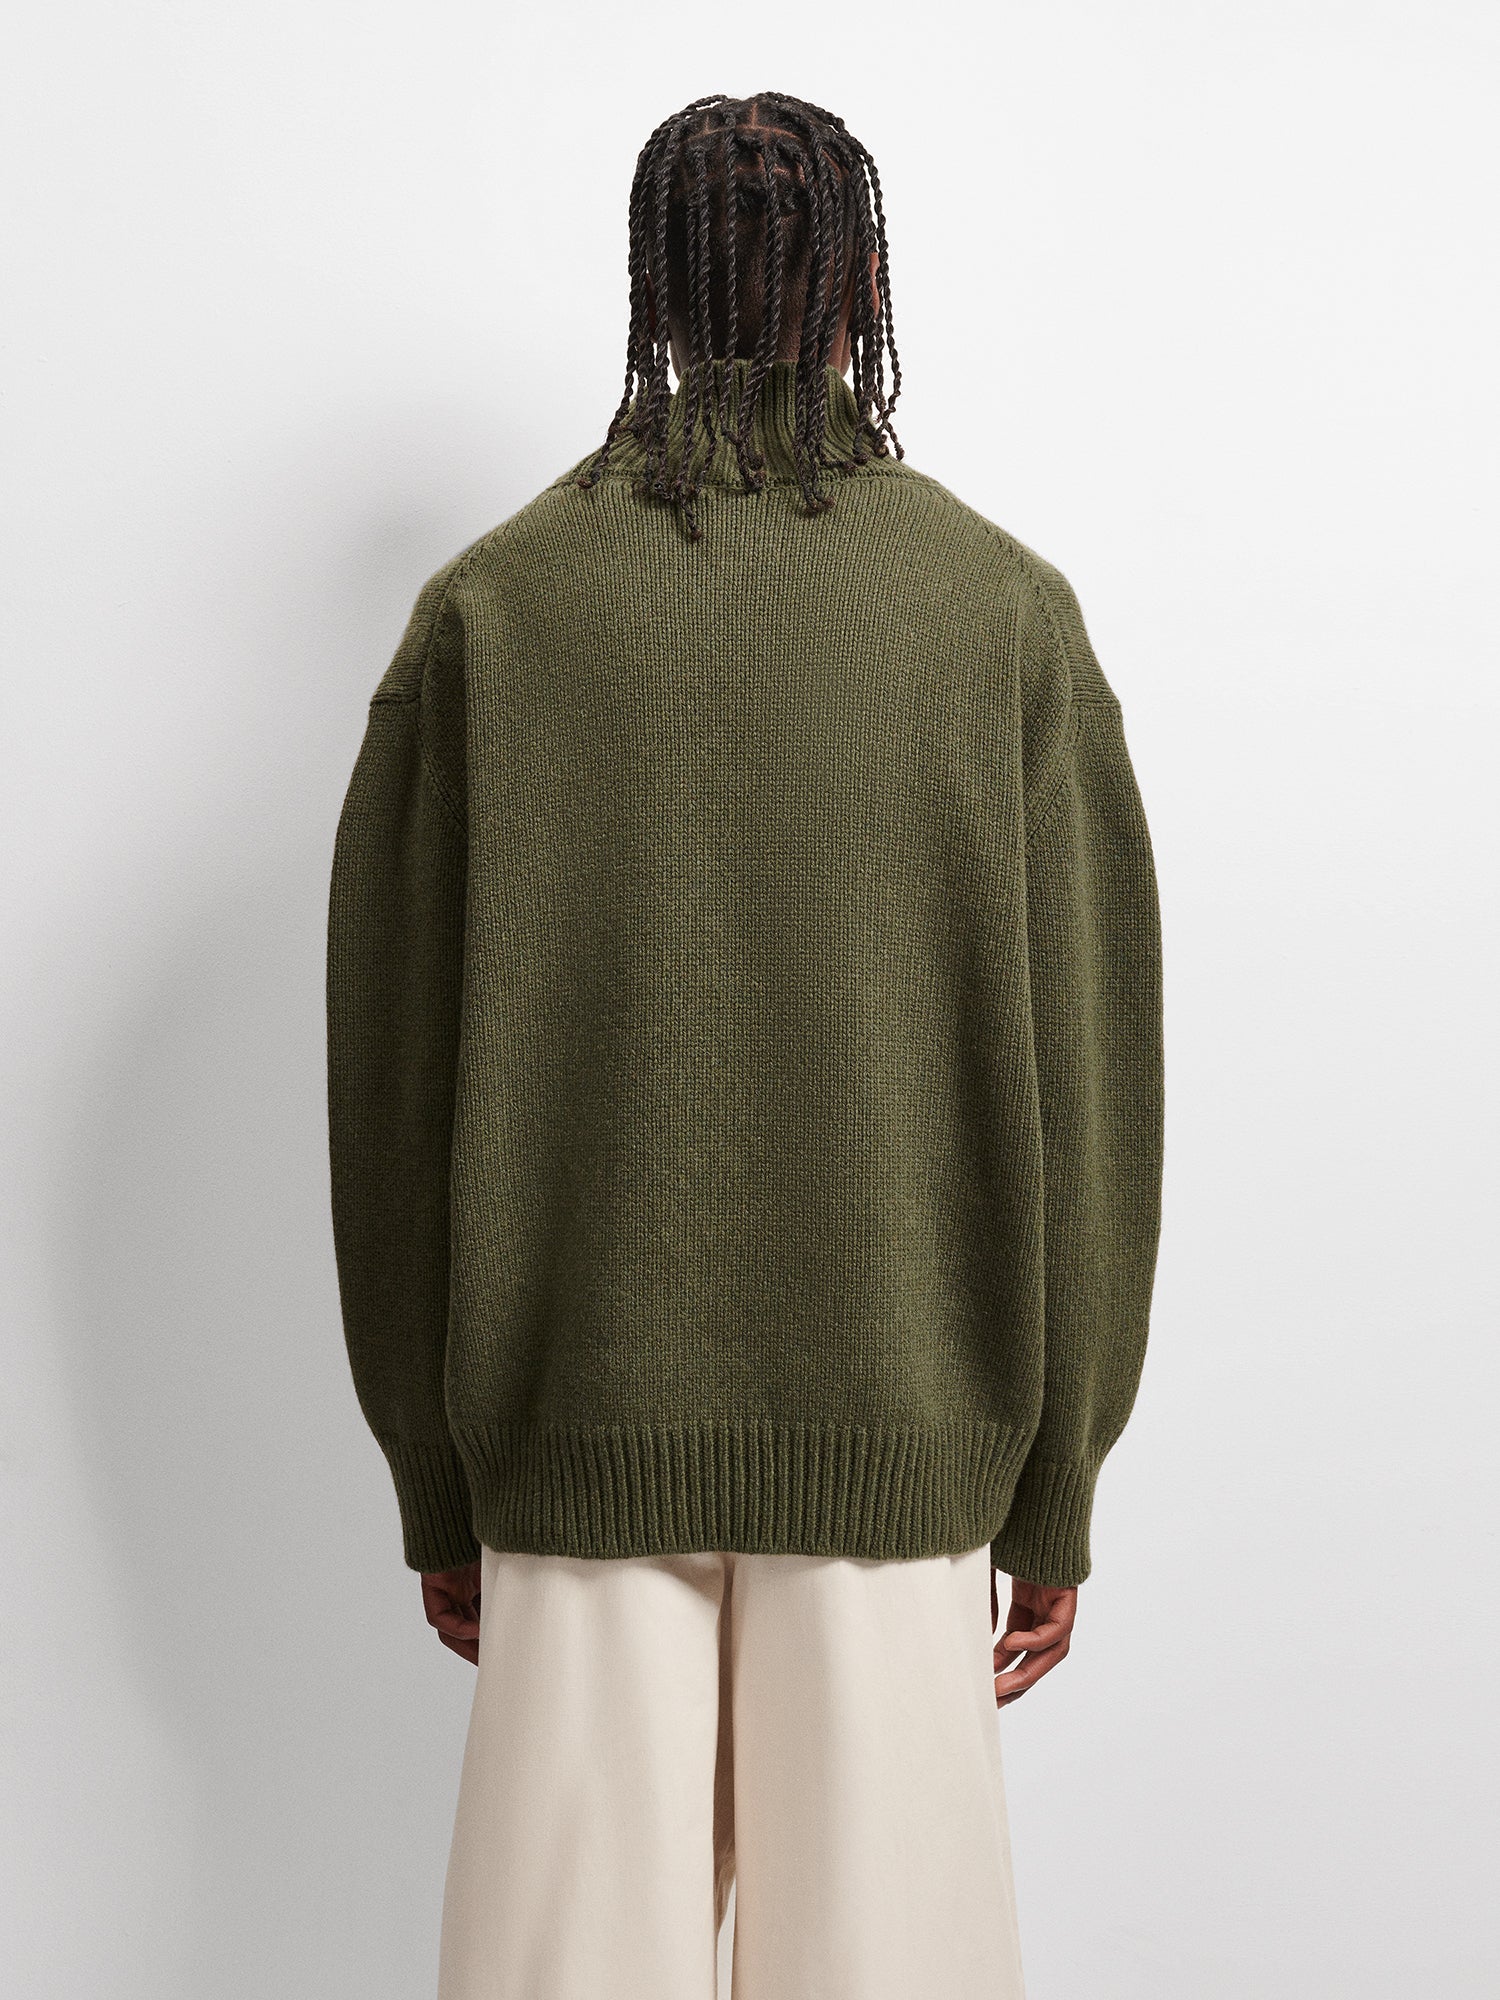 Mens_Recycled_Cashmere_Knit_Chunky_Turtleneck_Sweater_Rosemary_Green-2